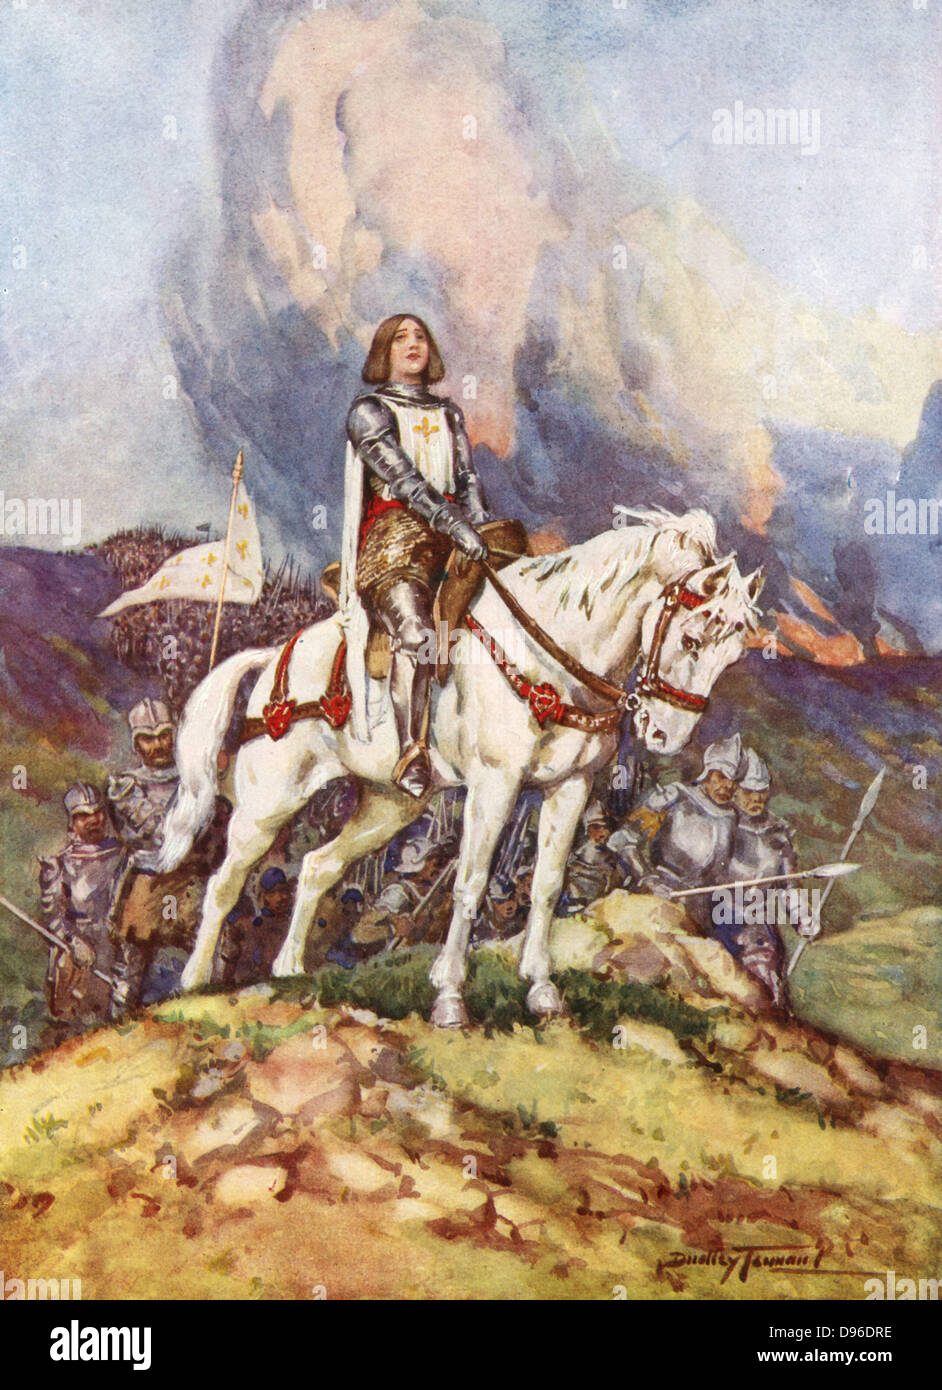 Joan of Arc (c1412-31) St Joan, St Jeanne d'Arc, the Maid of Orleans. French patriot and martyr. Joan at the head of the French army. Early 20th century illustration. Stock Photo